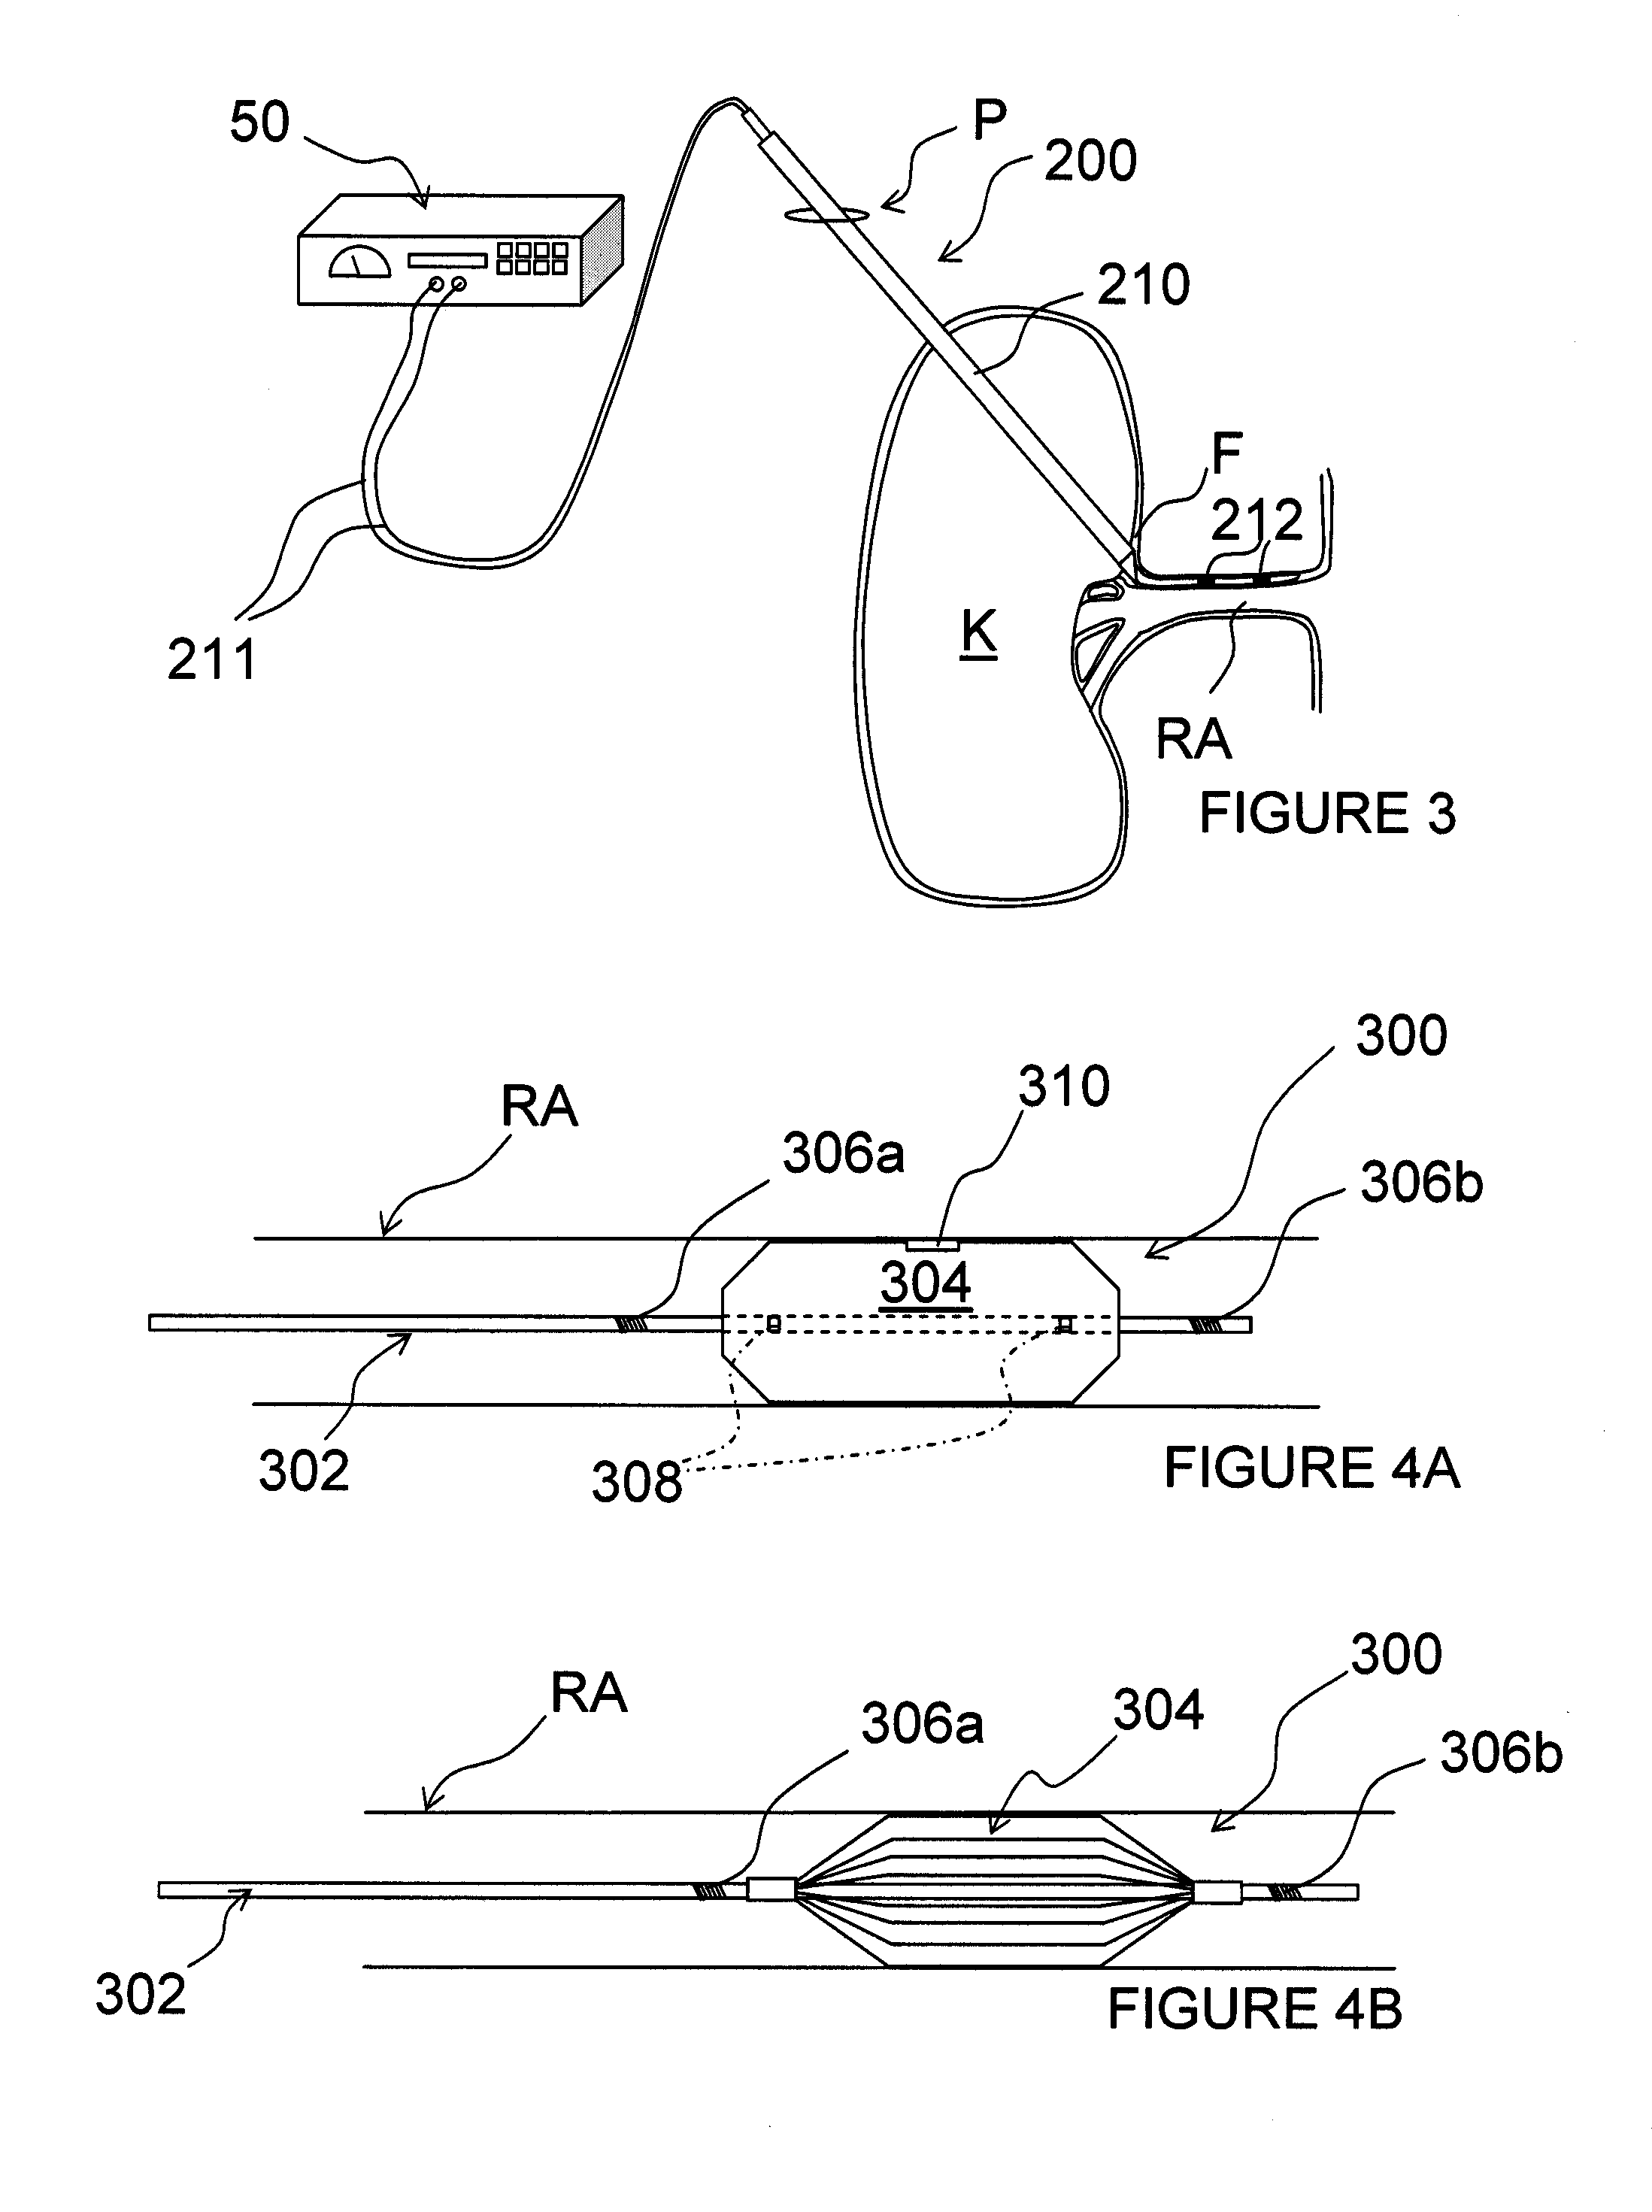 Methods for thermally-induced renal neuromodulation